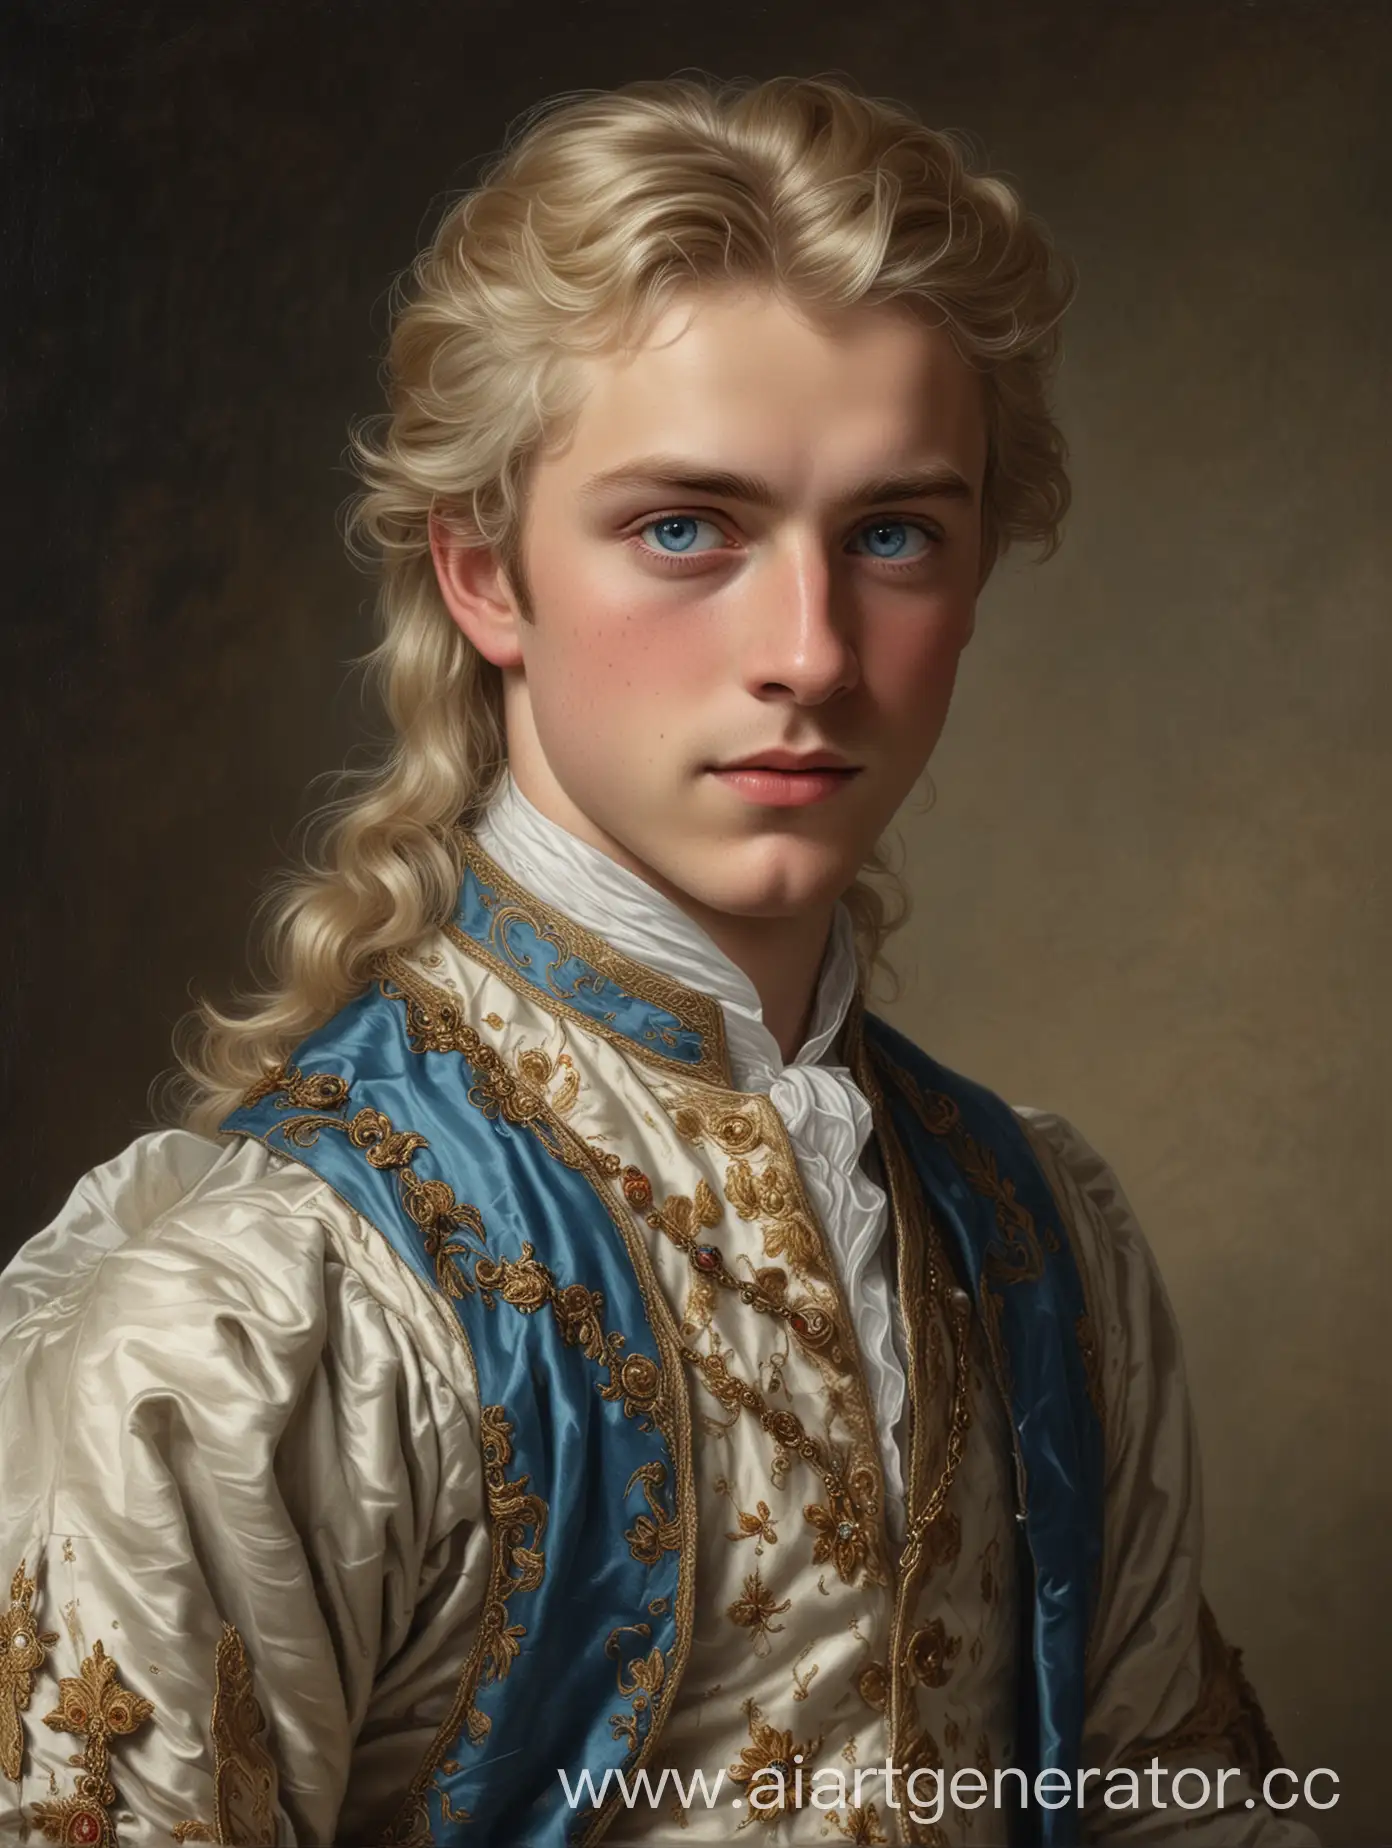 Portrait-of-a-Wealthy-Young-Nobleman-with-Fair-Hair-and-Blue-Eyes